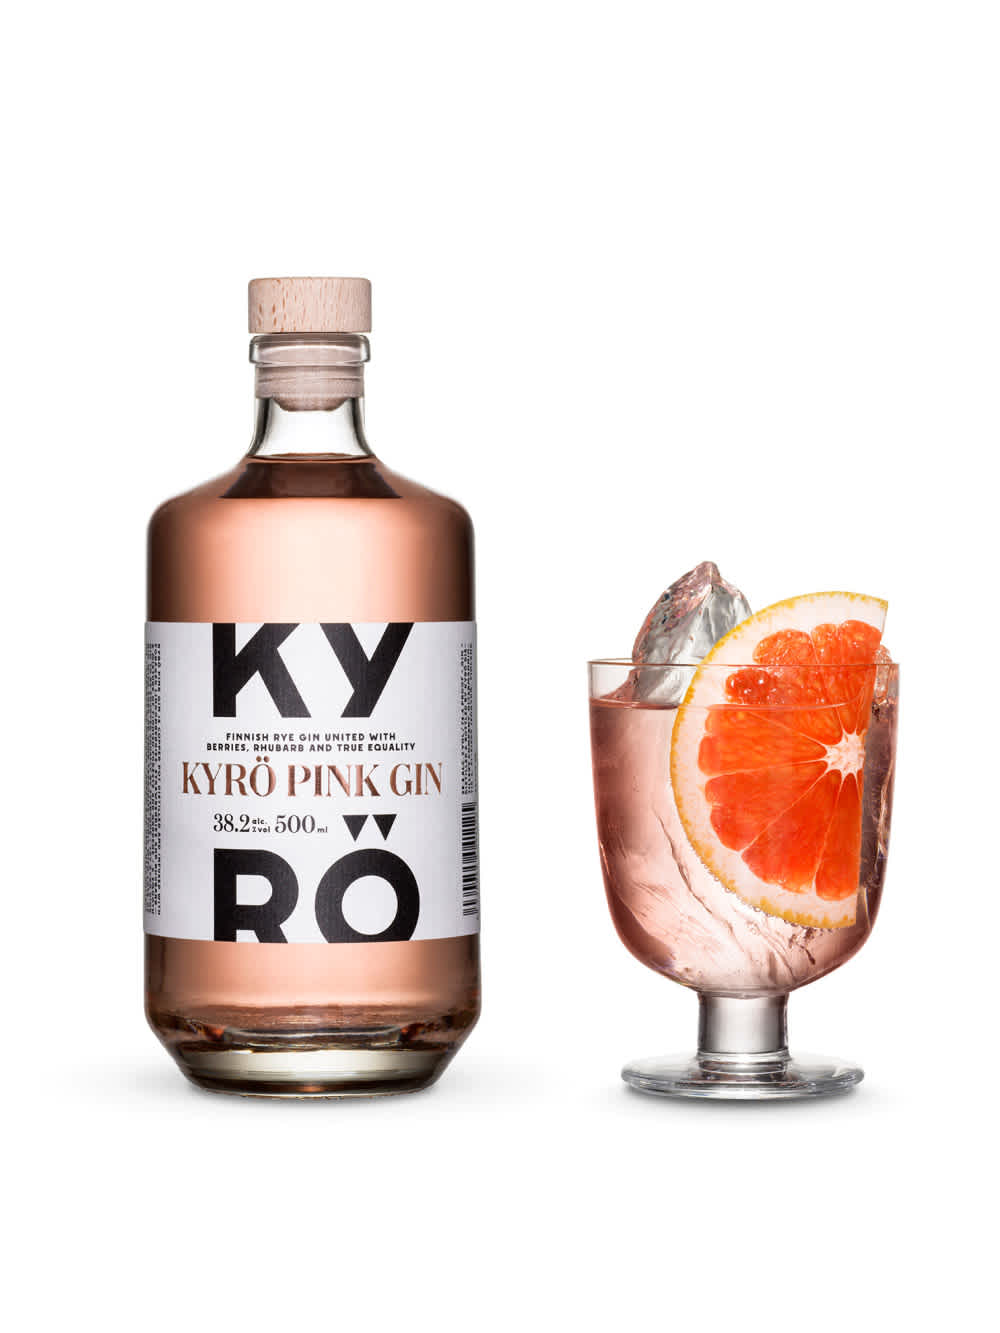 A bottle of Kyrö Pink Gin next to the perfect serve, in an Iittala cocktail glass, hand-cut shards of ice, and a slice of blood orange. Photo by KoskiSyväri.